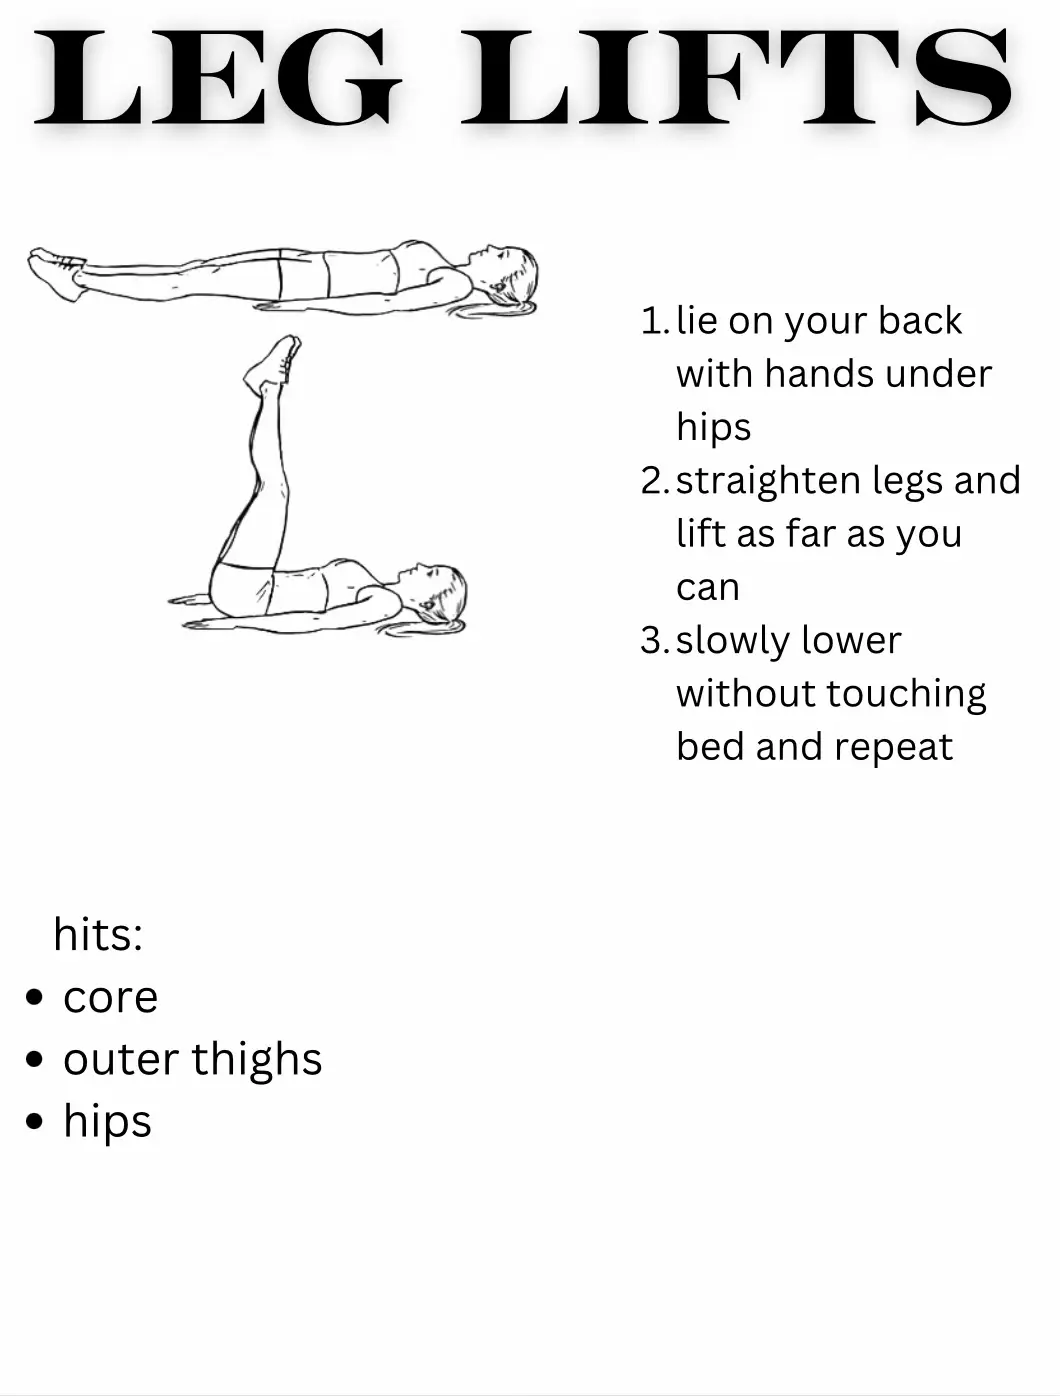  A drawing of a person's leg lifts